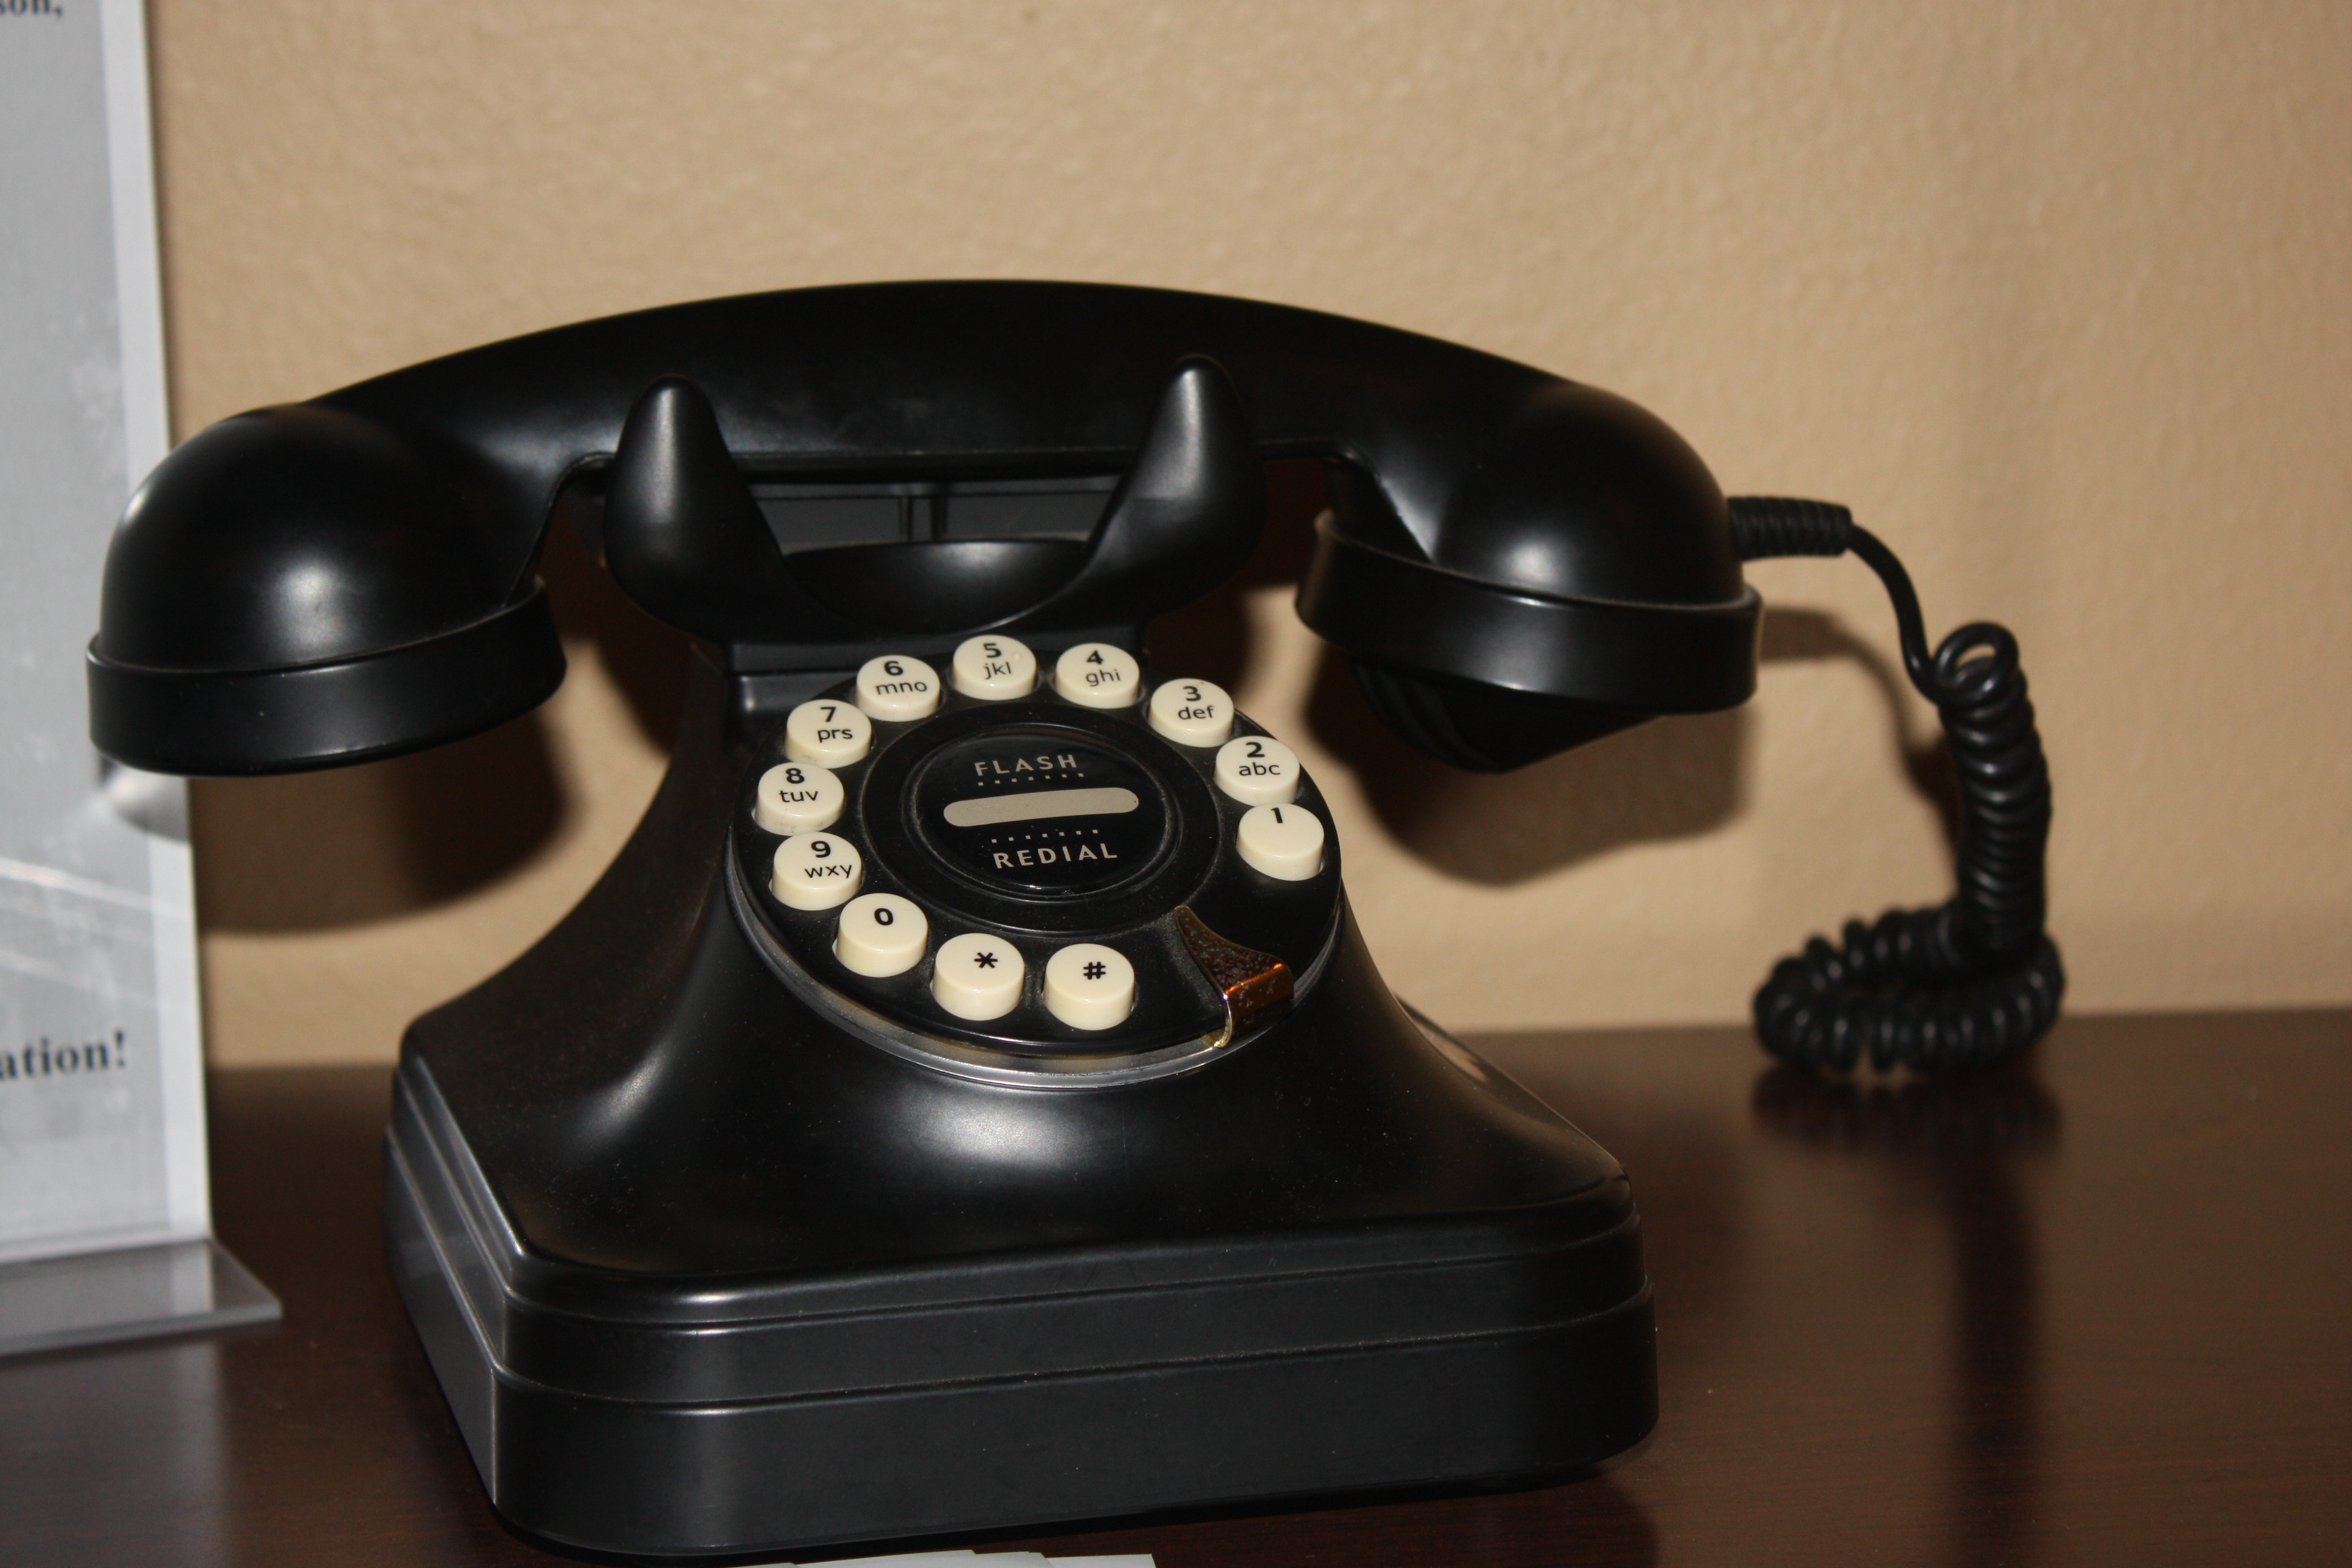 black rotary telephone on top of brown wooded surface